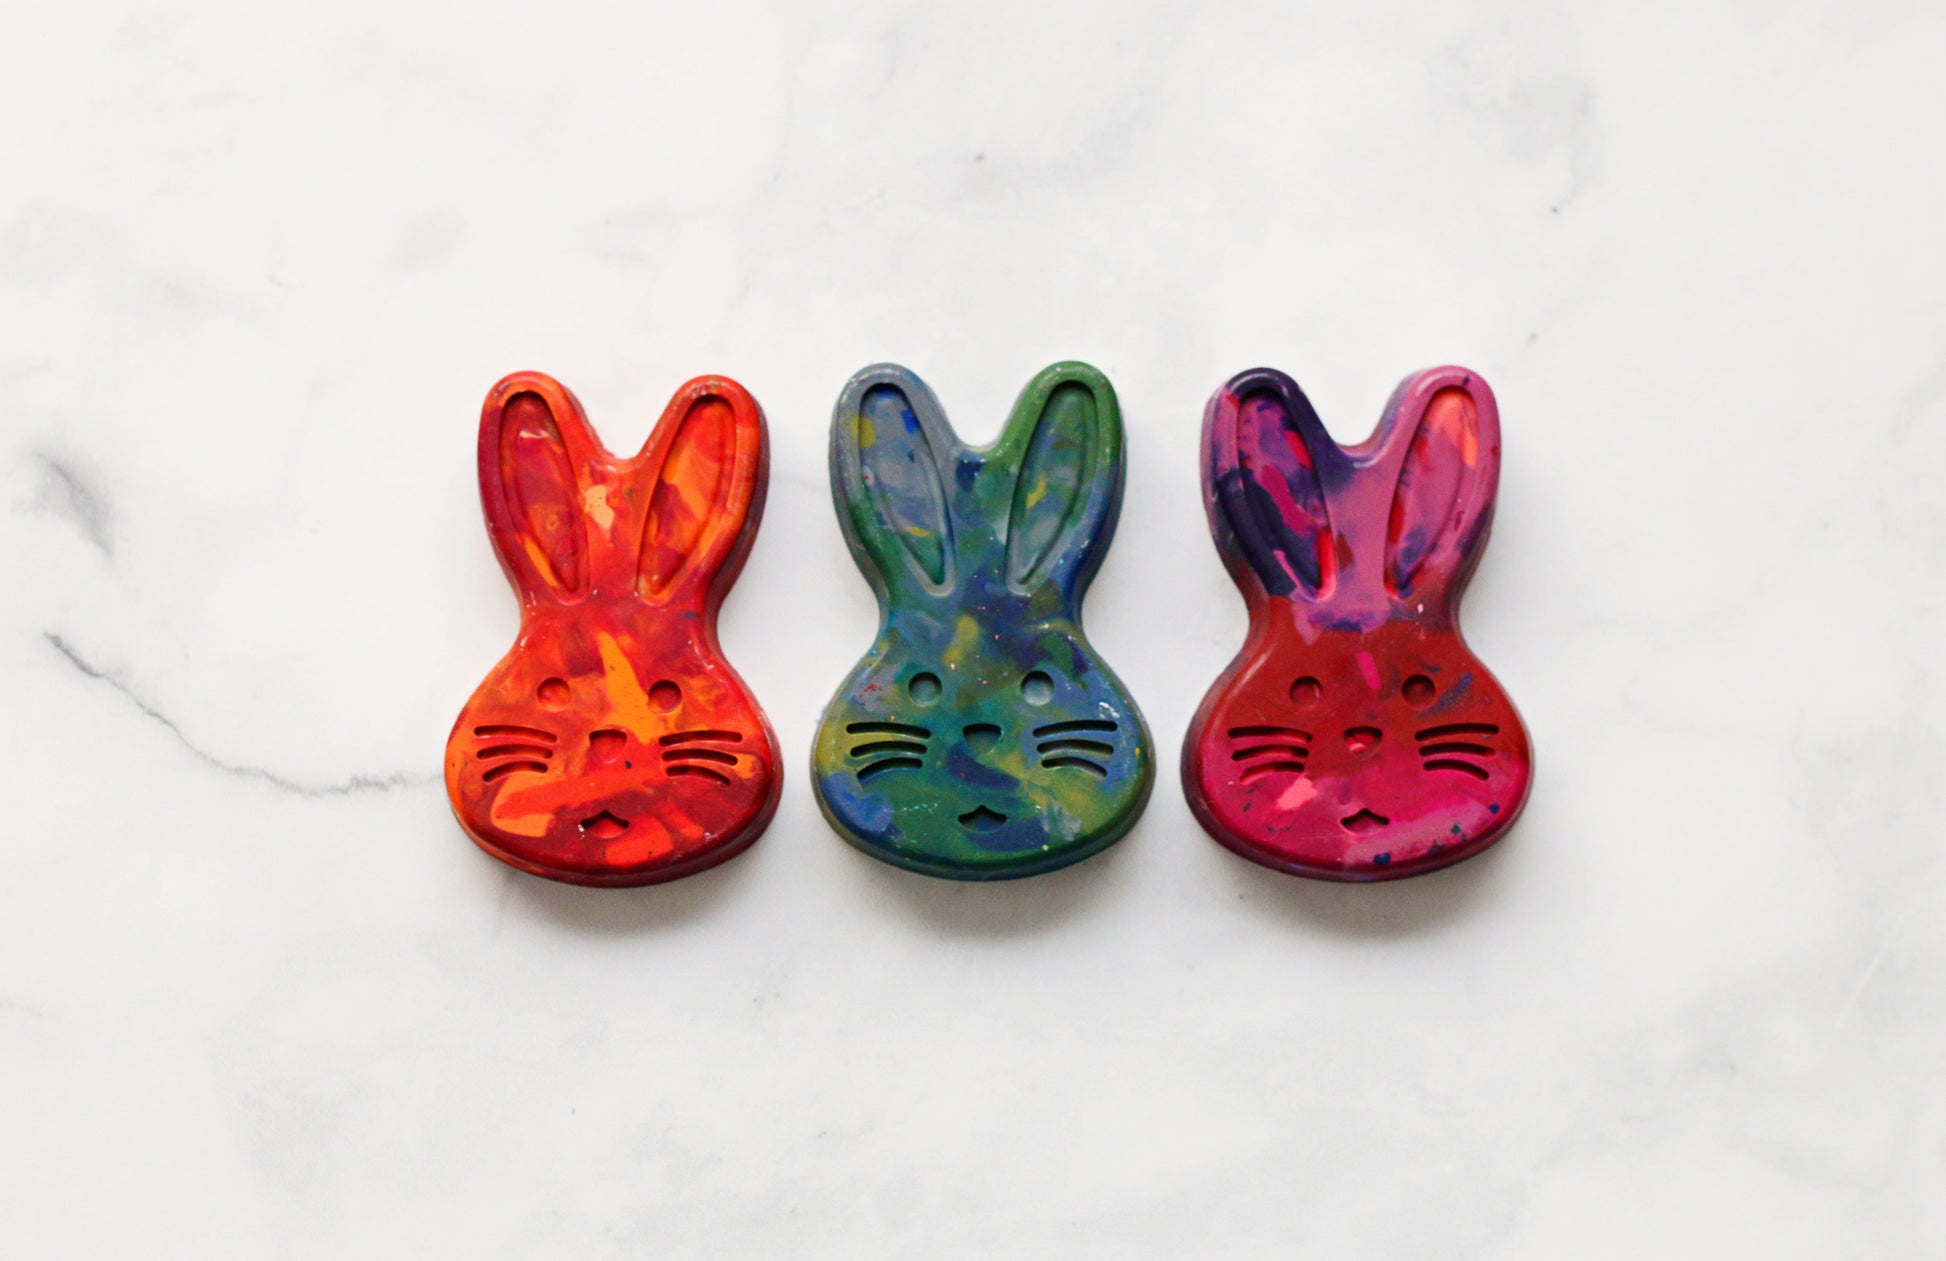 Rainbow Crayon Bunny Bundle Gift Sets - multicolored rainbow crayons, perfect for Easter Basket stuffers and a unique gift idea for Easter crafts for kids or learning activities for kids. Original Rainbow Crayons® by Art 2 the Extreme